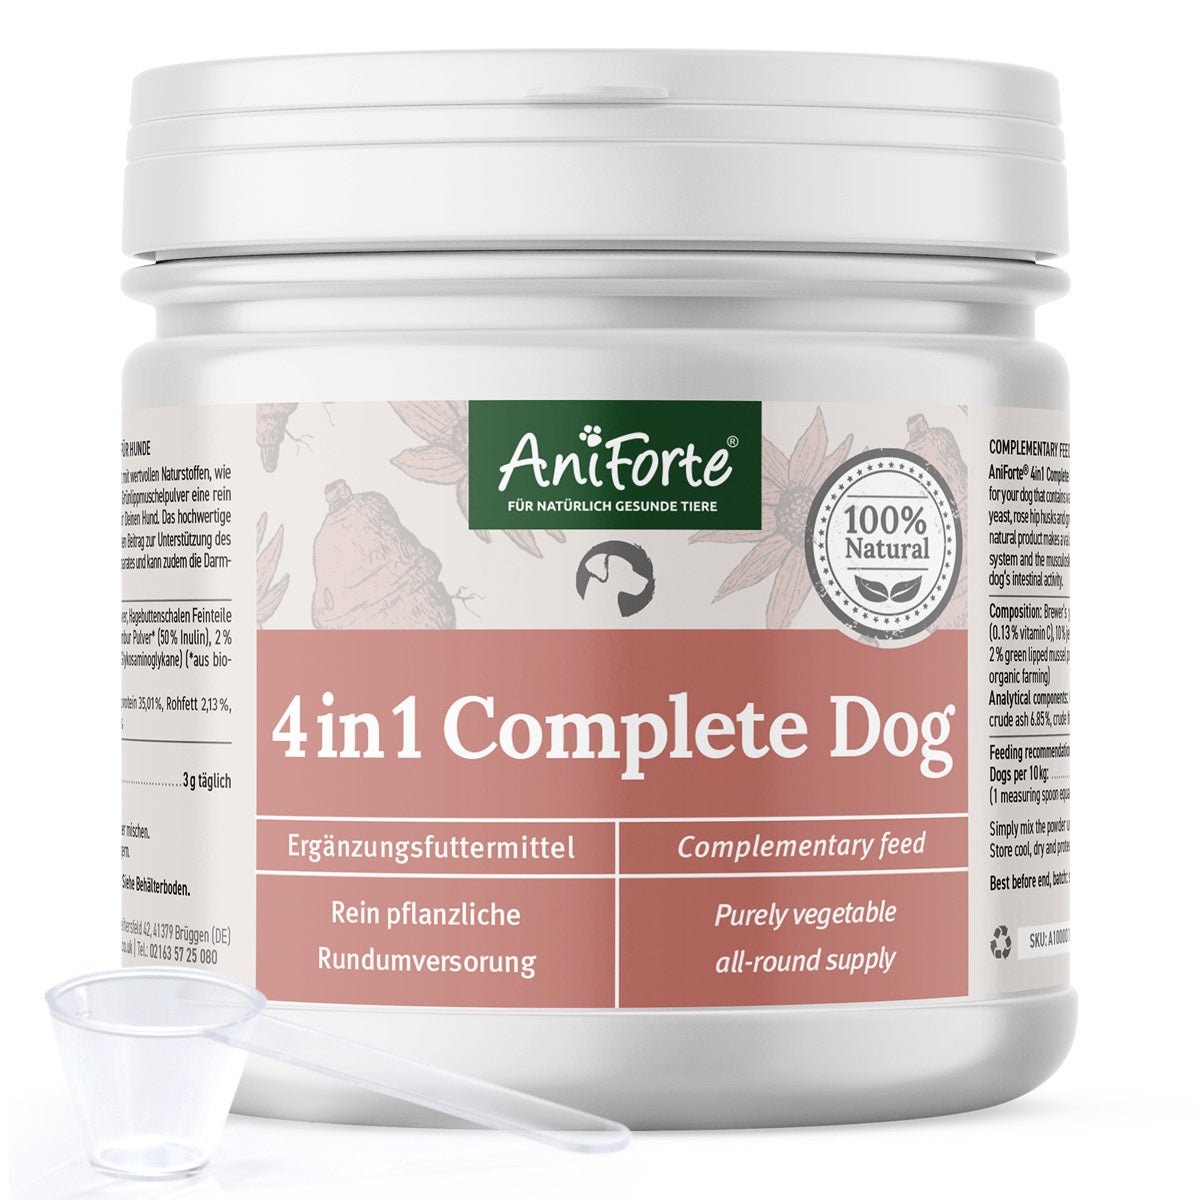 4in1 Complete Dog - AniForte